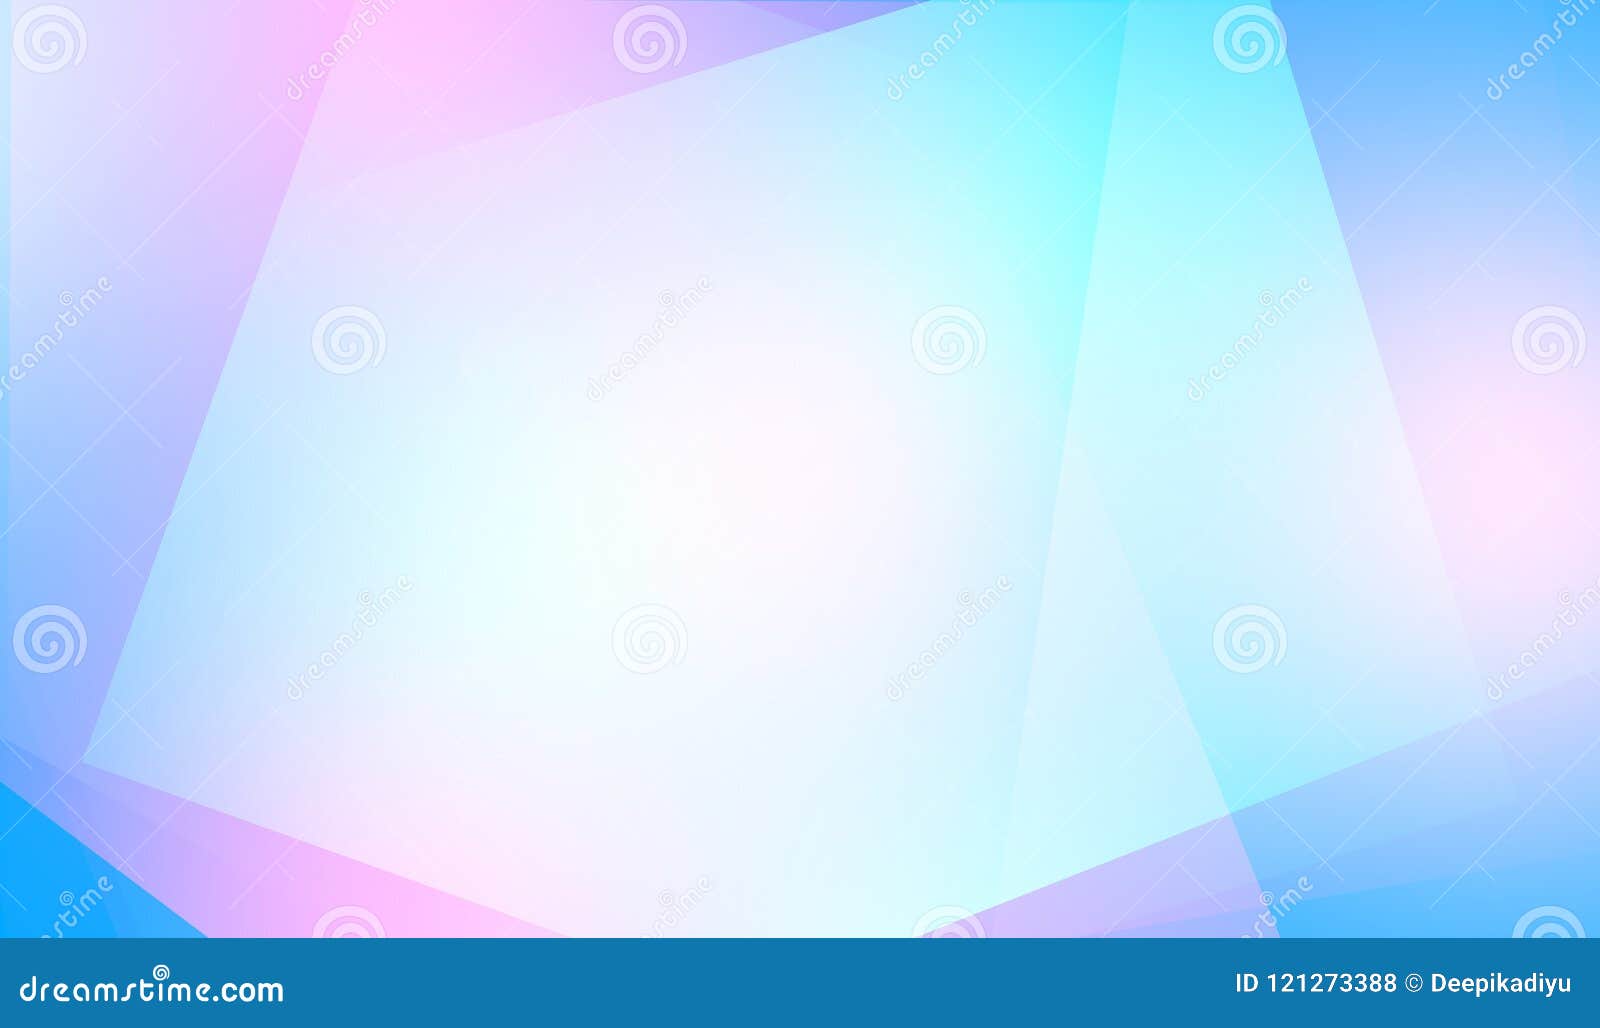 Light-color-blue-abstract-simple-background Stock Illustration -  Illustration of lightcolorblueabstractsimplebackground,  lightcolorblueabsimplebackground: 121273388